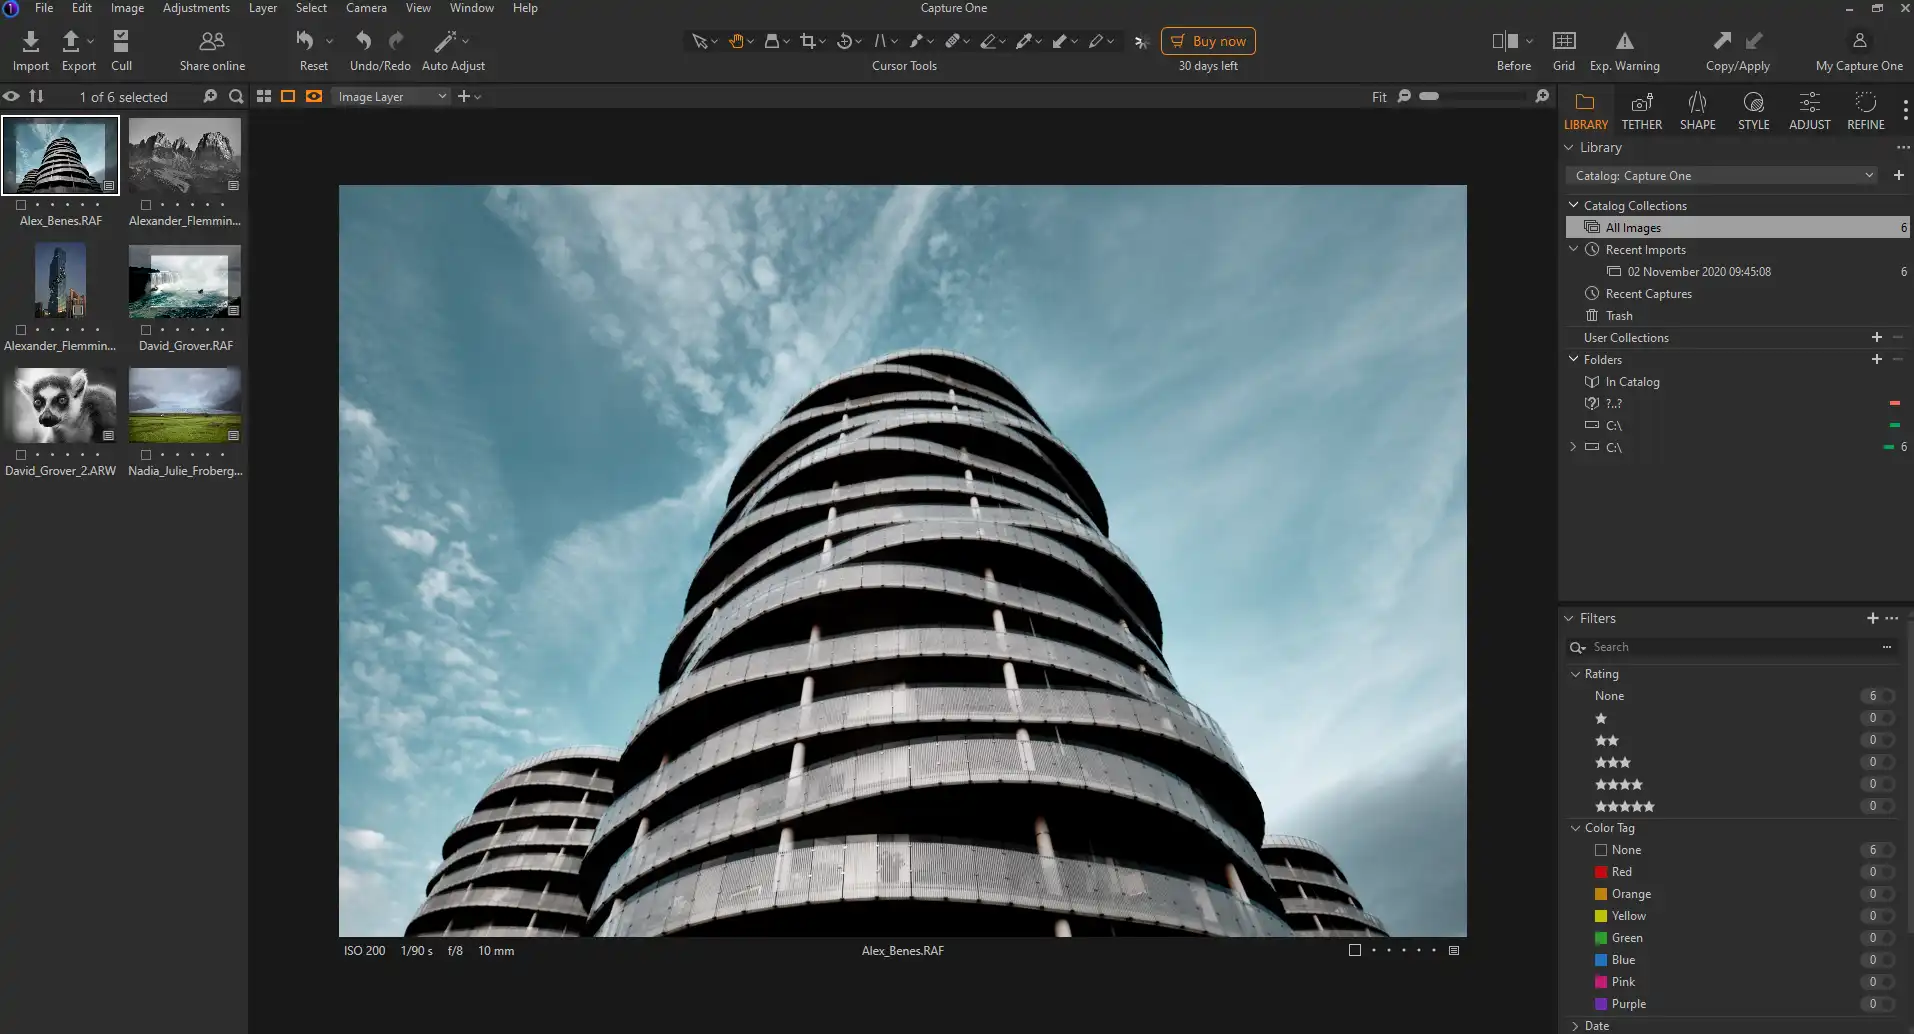 Capture One Photo Editor interface with photo of a circular building from low angle